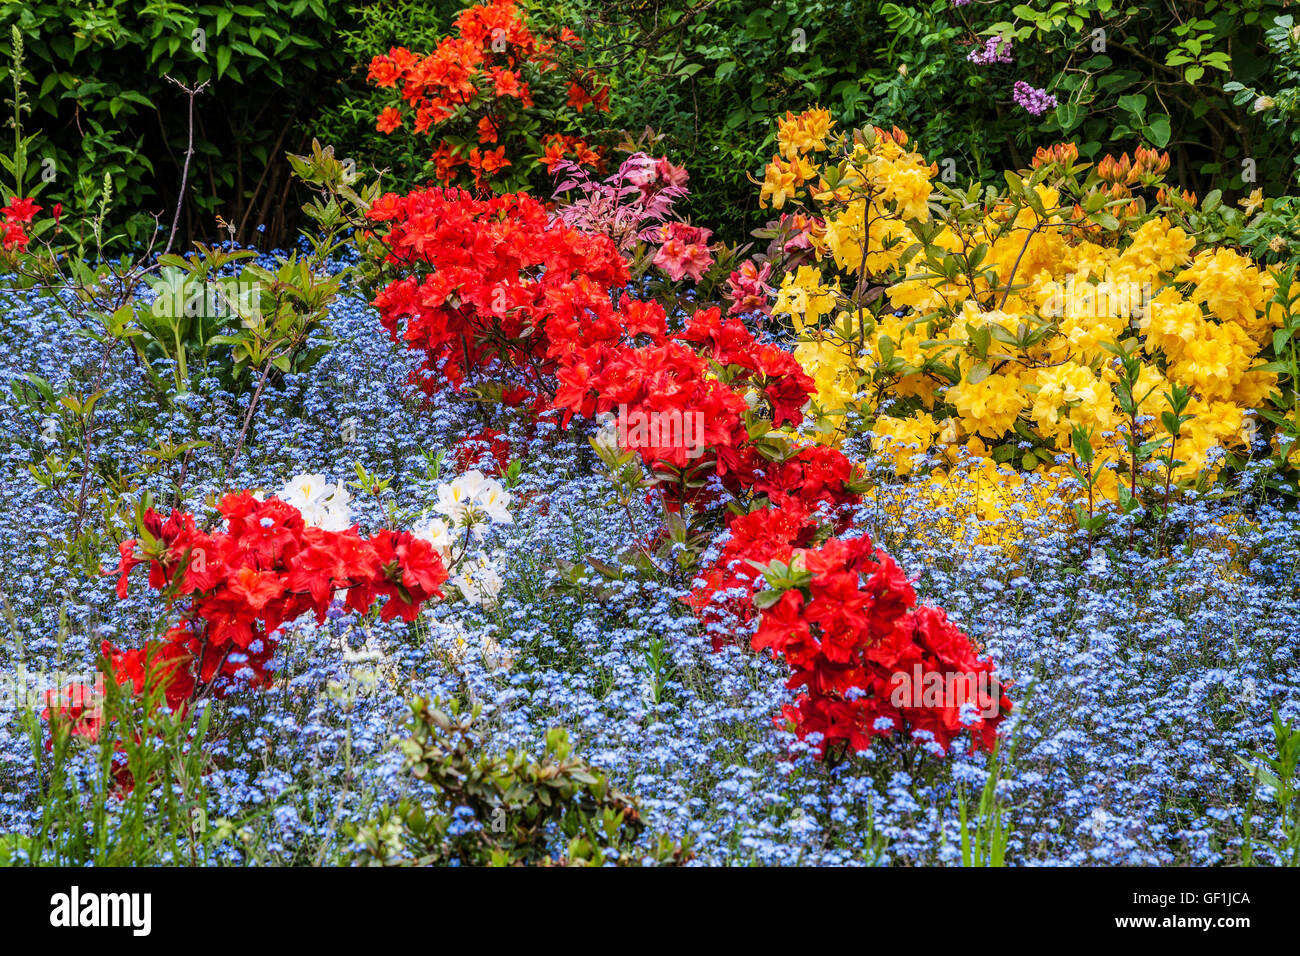 Colourful planting of rhododendrons and forget-me-nots in an English country garden. Stock Photo